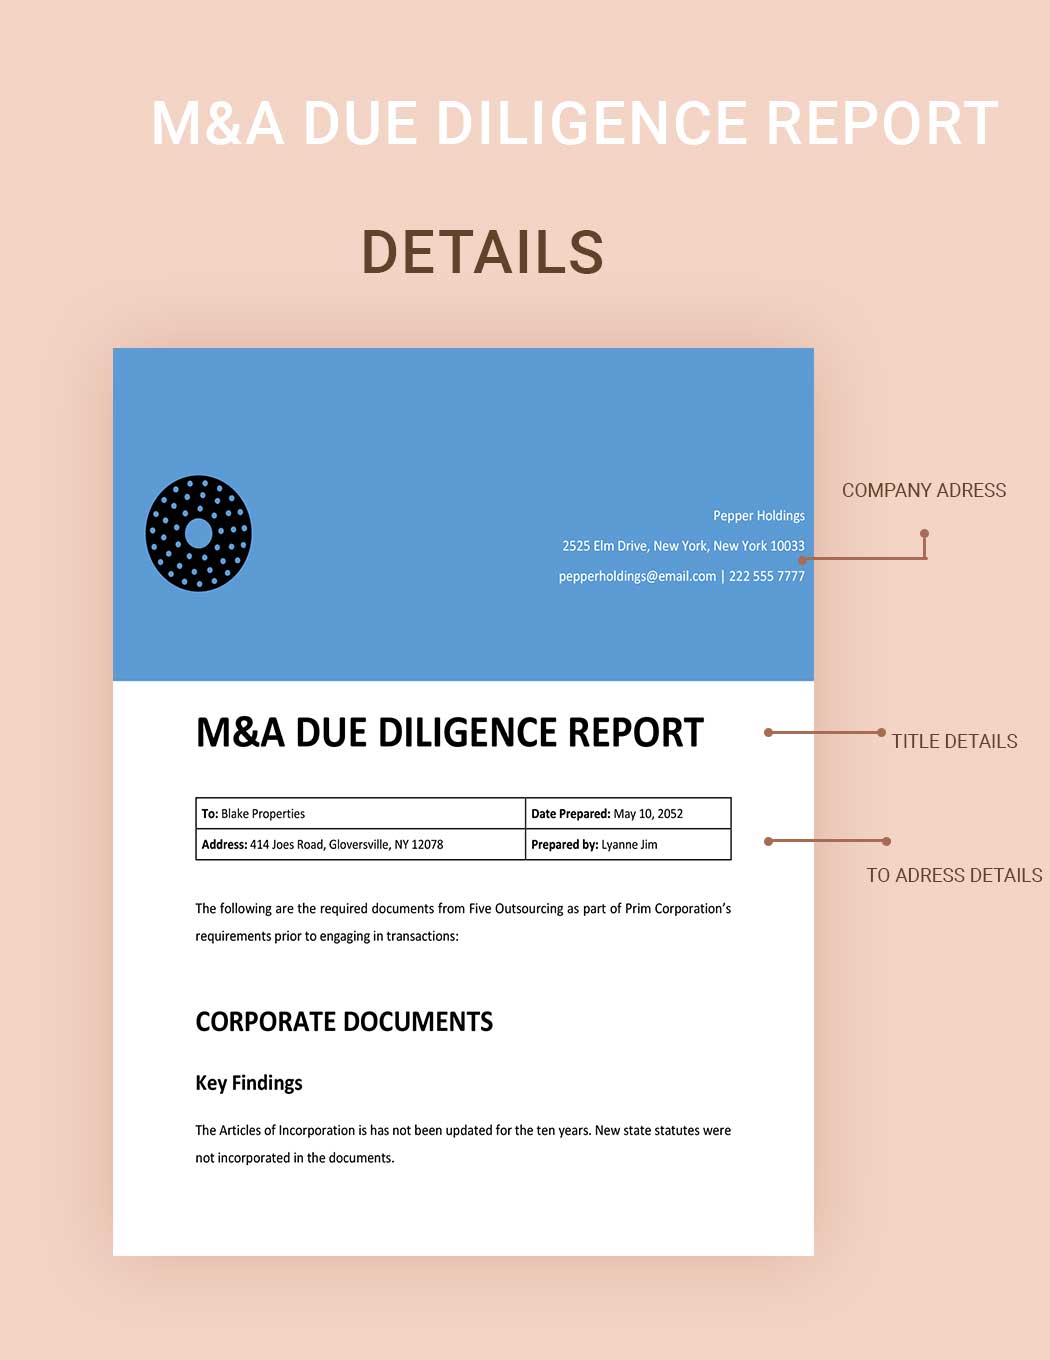 M&A Due Diligence Report 